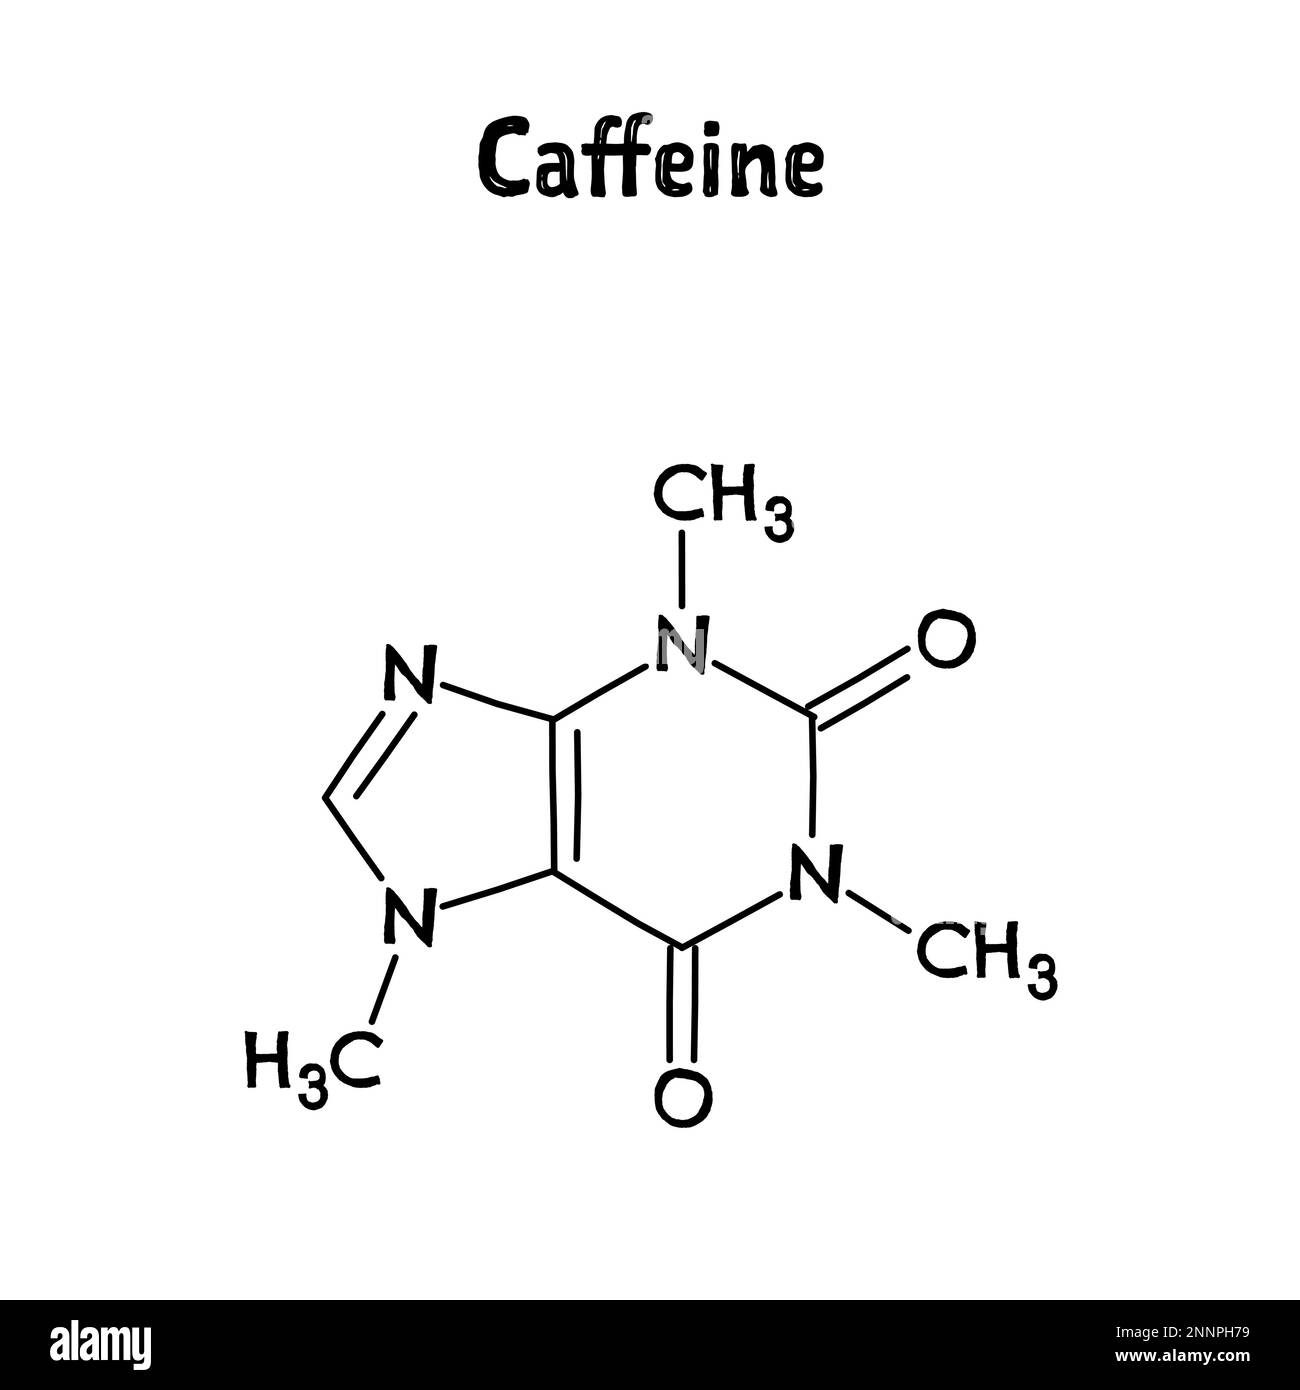 Caffeine molecular structure. Caffeine is central nervous system stimulant used as cognitive enhancer, increasing alertness and attentional performance. .Vector structural formula of chemical compound. Black pen Hand-drawn style. Stock Vector